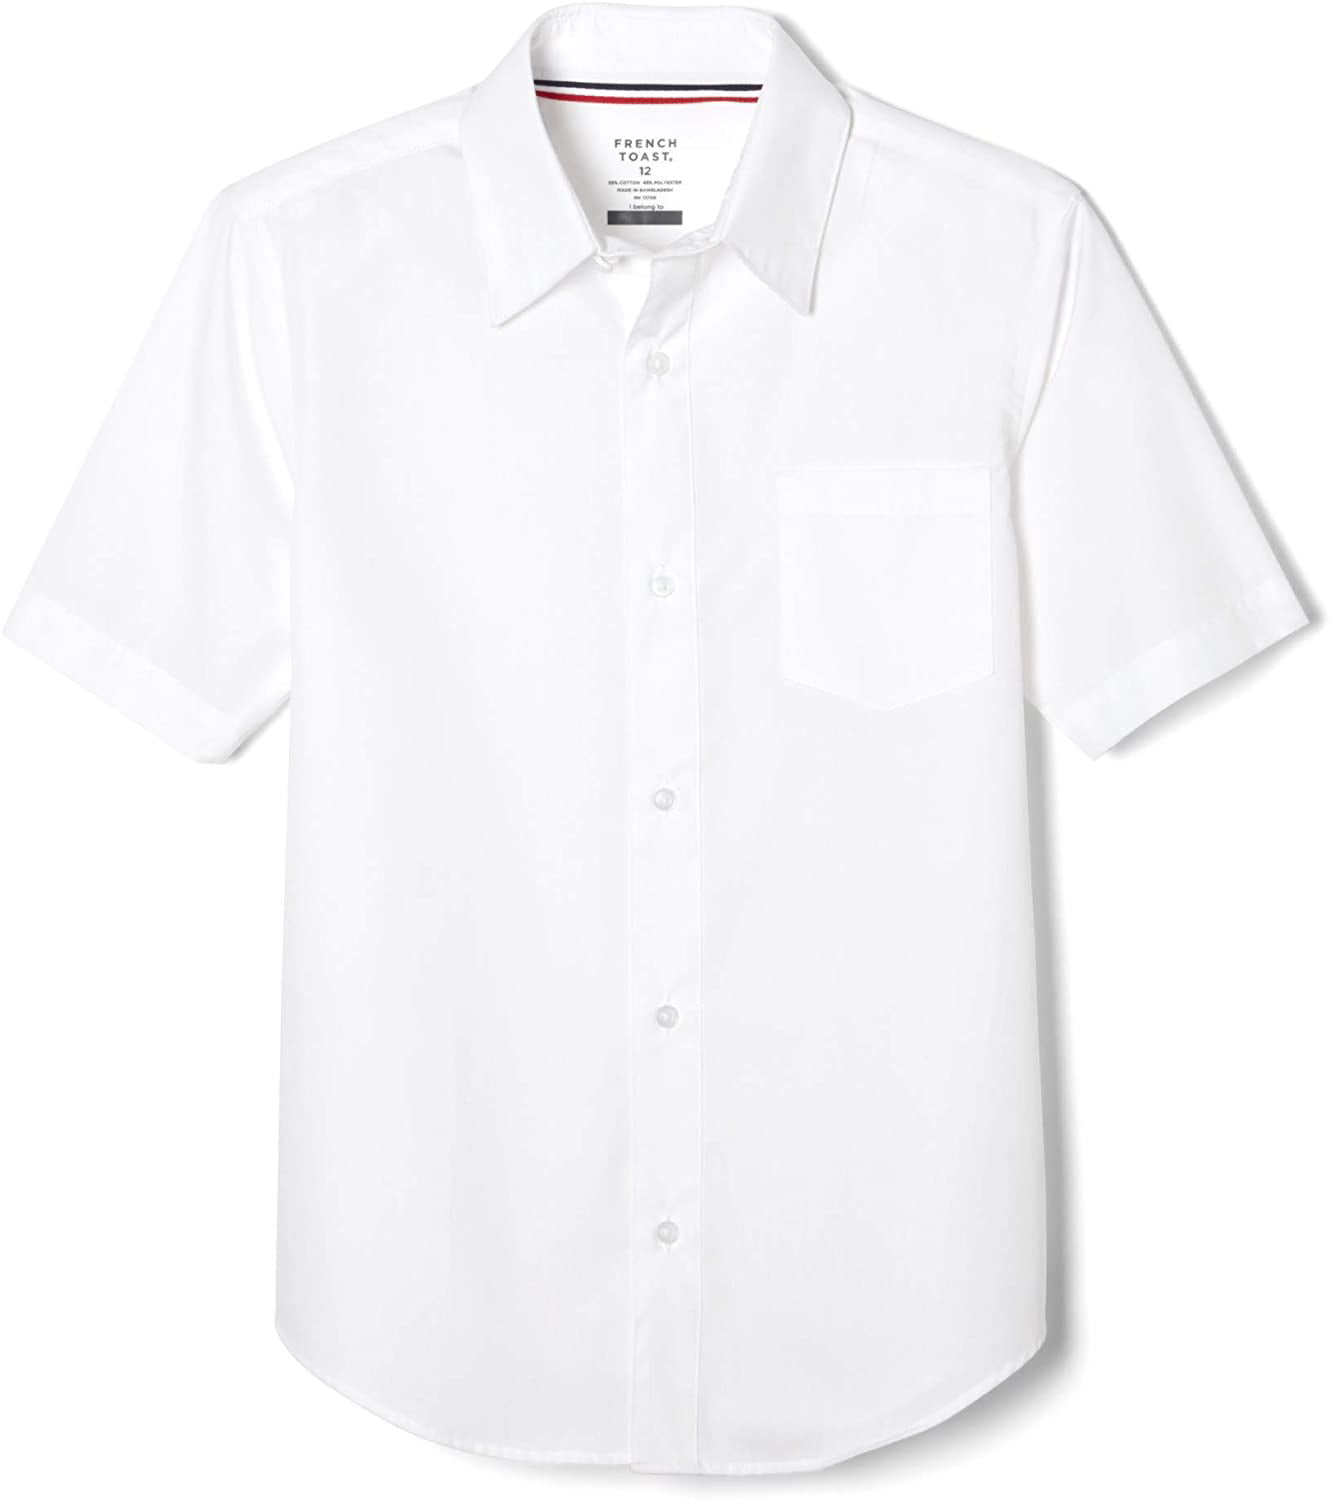 Small French Toast Mens Short Sleeve Classic Dress Shirt White 